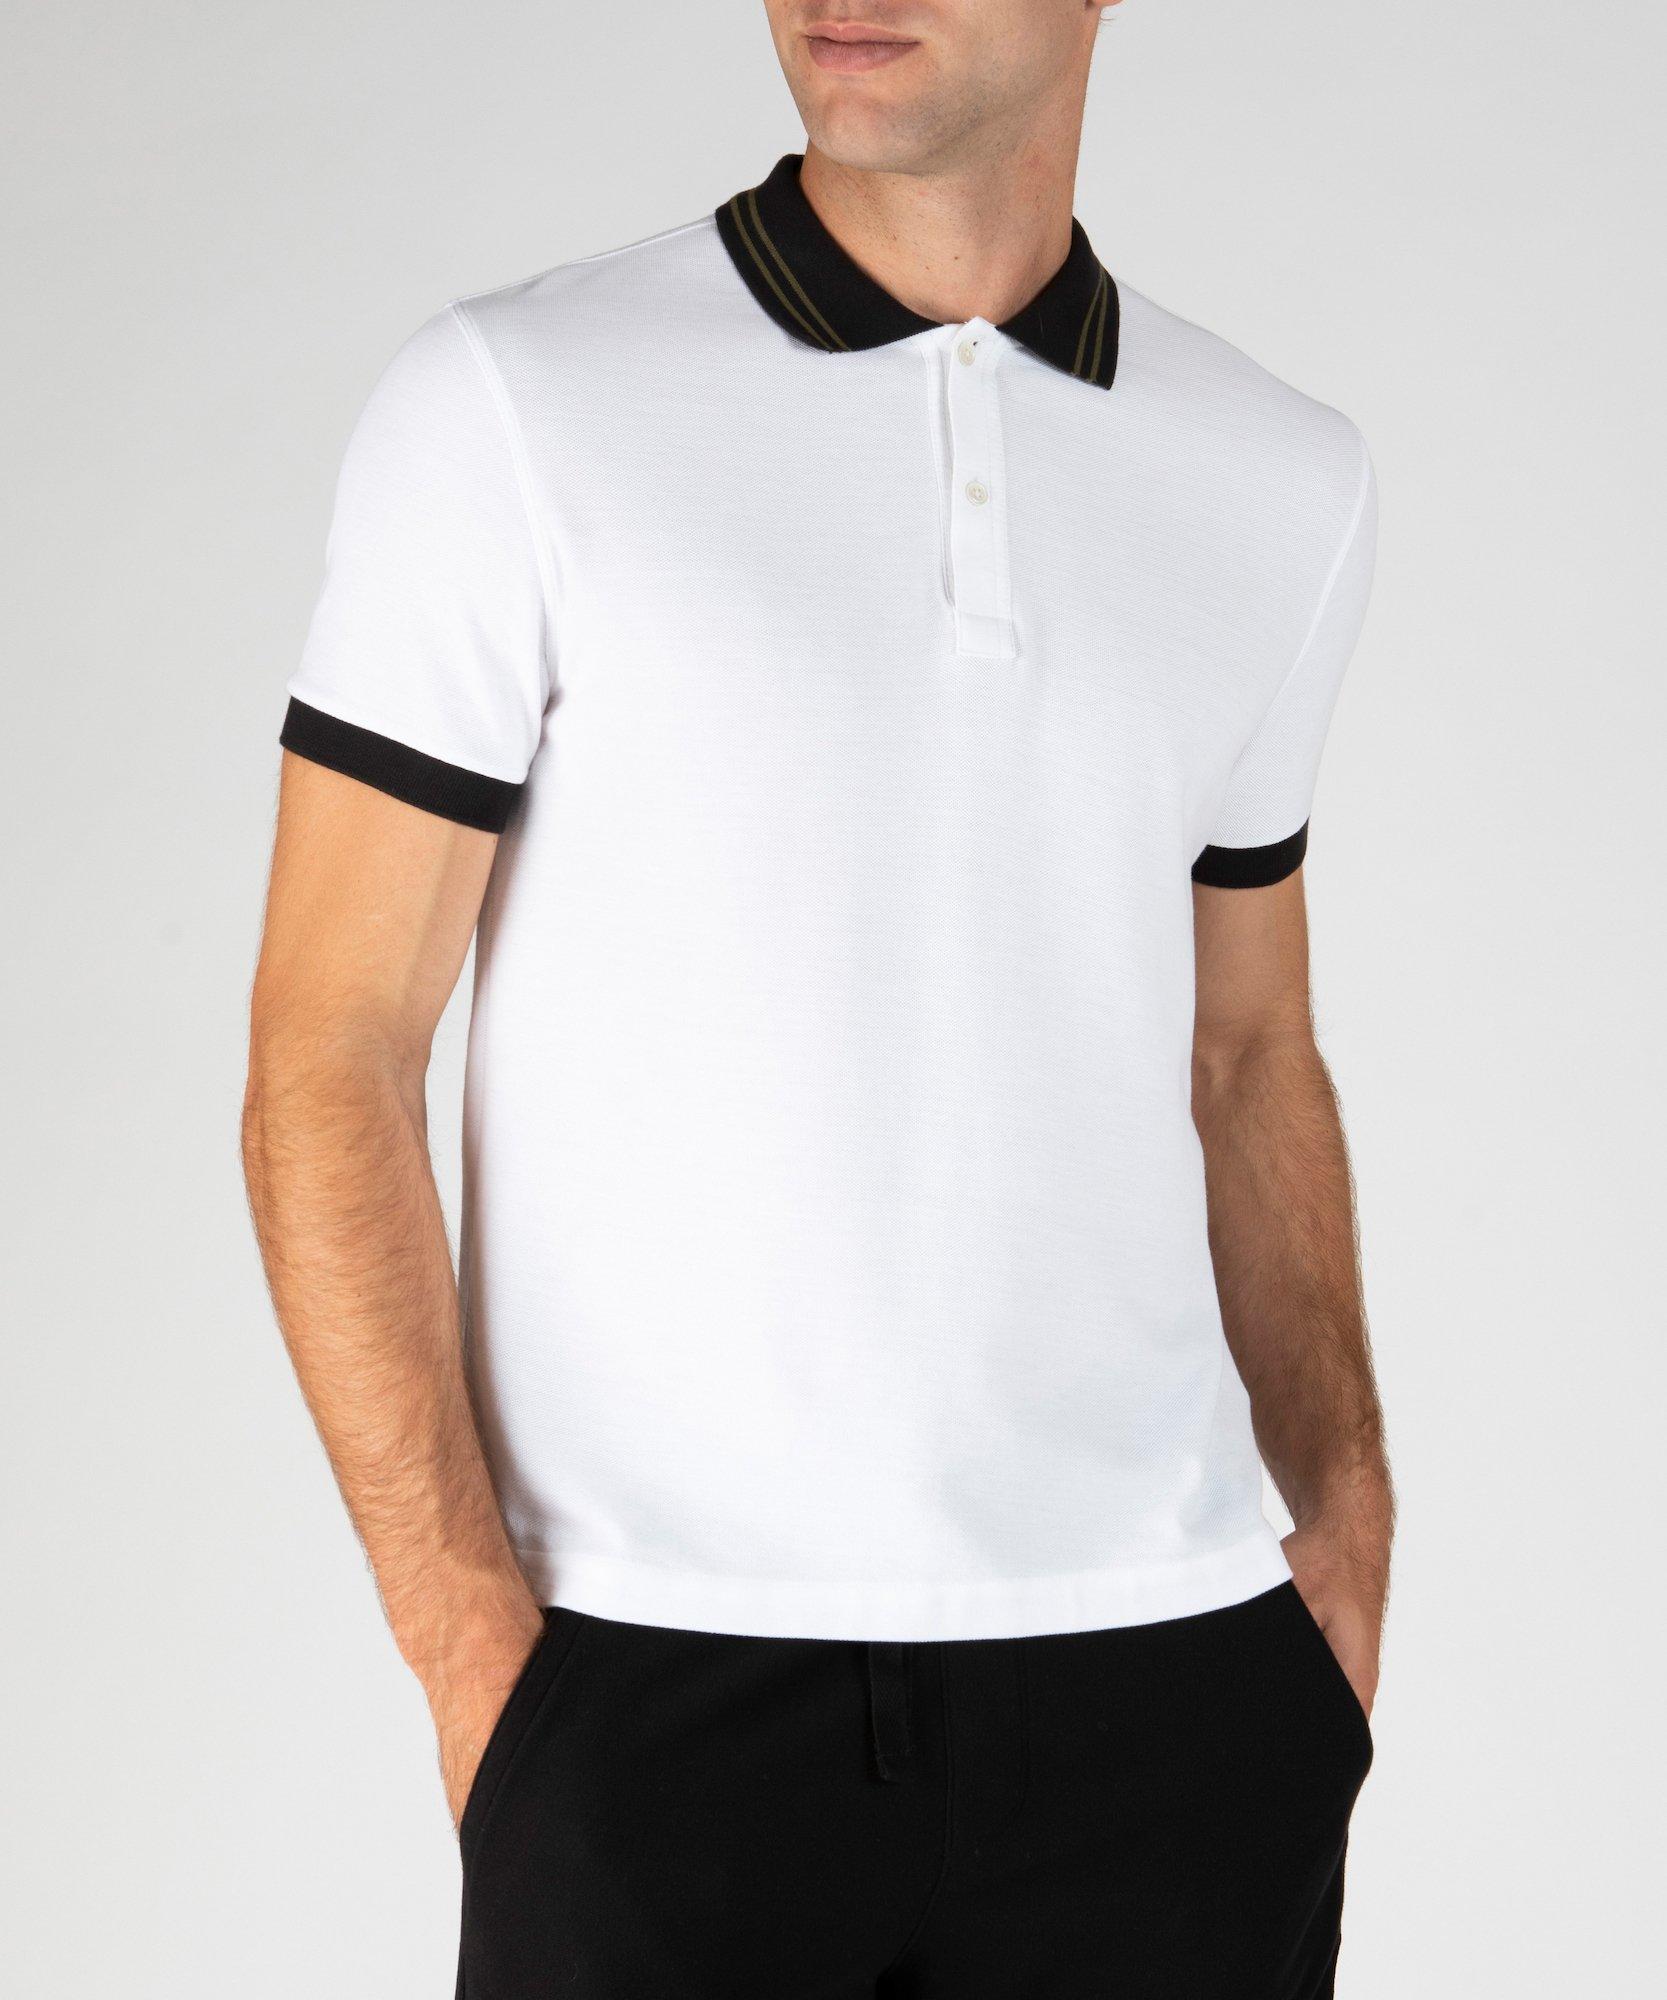 ATM Cotton Tipped Pique Polo in White for Men - Save 25% - Lyst